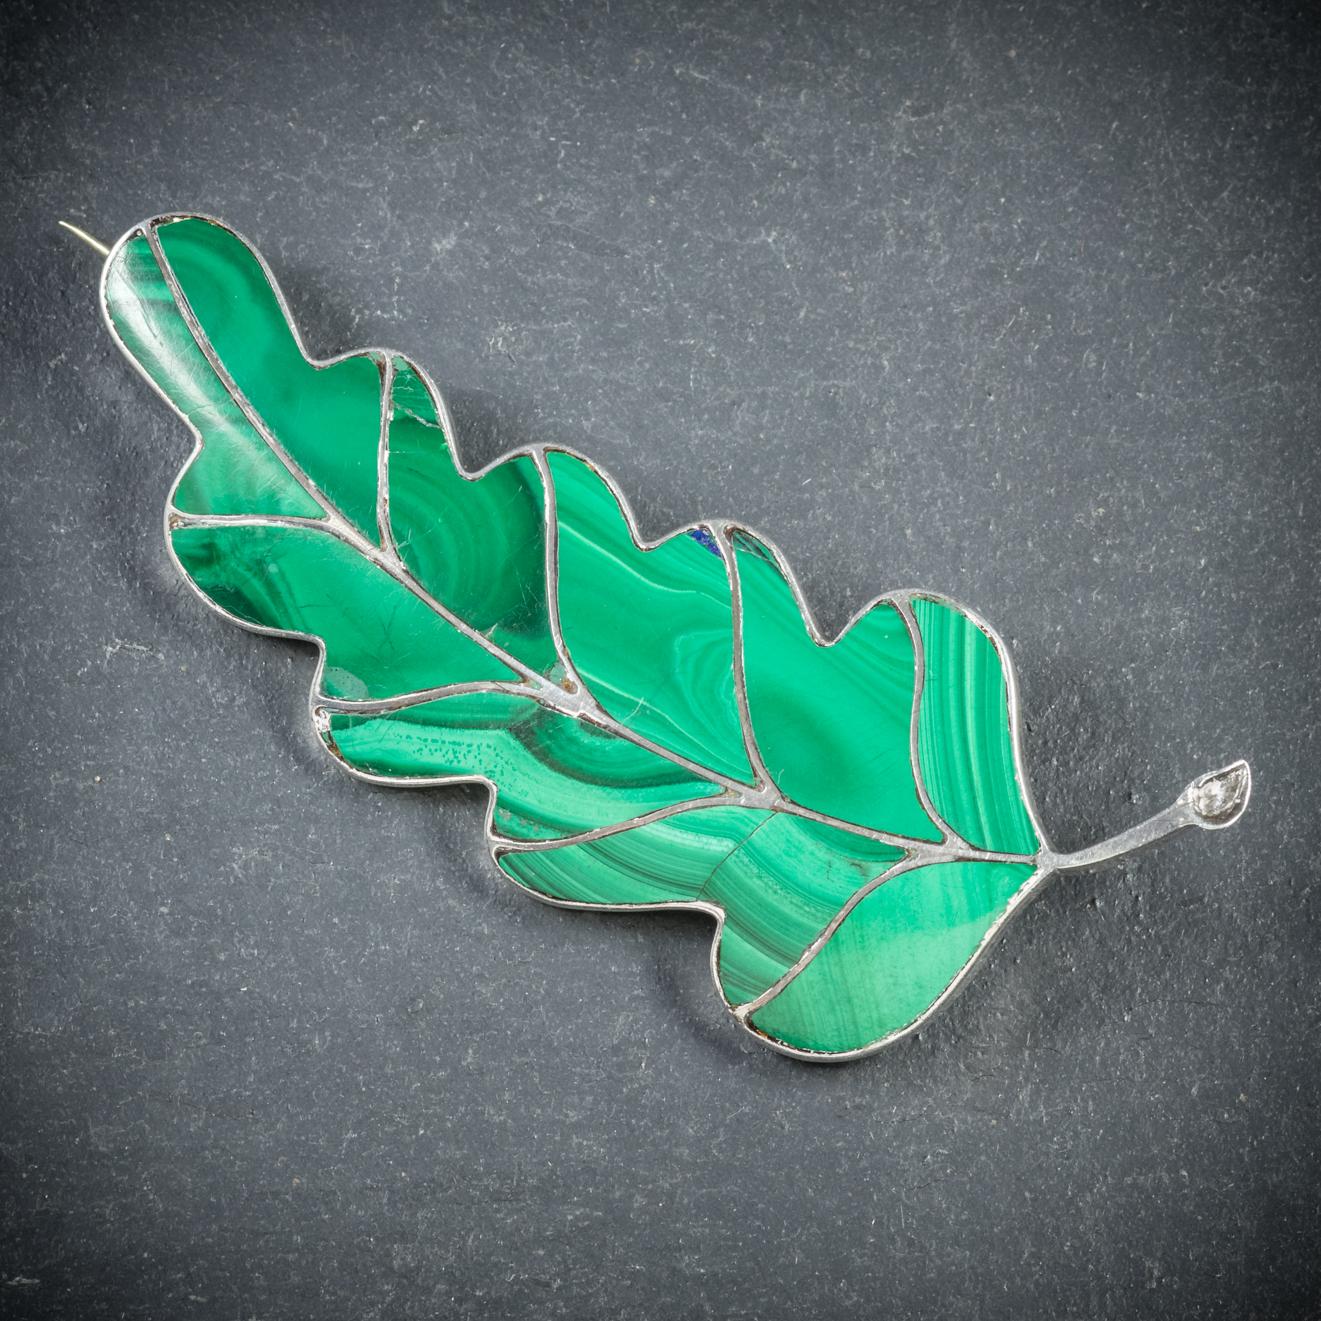 A striking antique Scottish leaf brooch from the Victorian era, Circa 1900

The wonderful leaf shaped brooch is set with beautiful green Malachites which have lovely natural patterns across the surface

All set in Silver and fitted with a secure pin